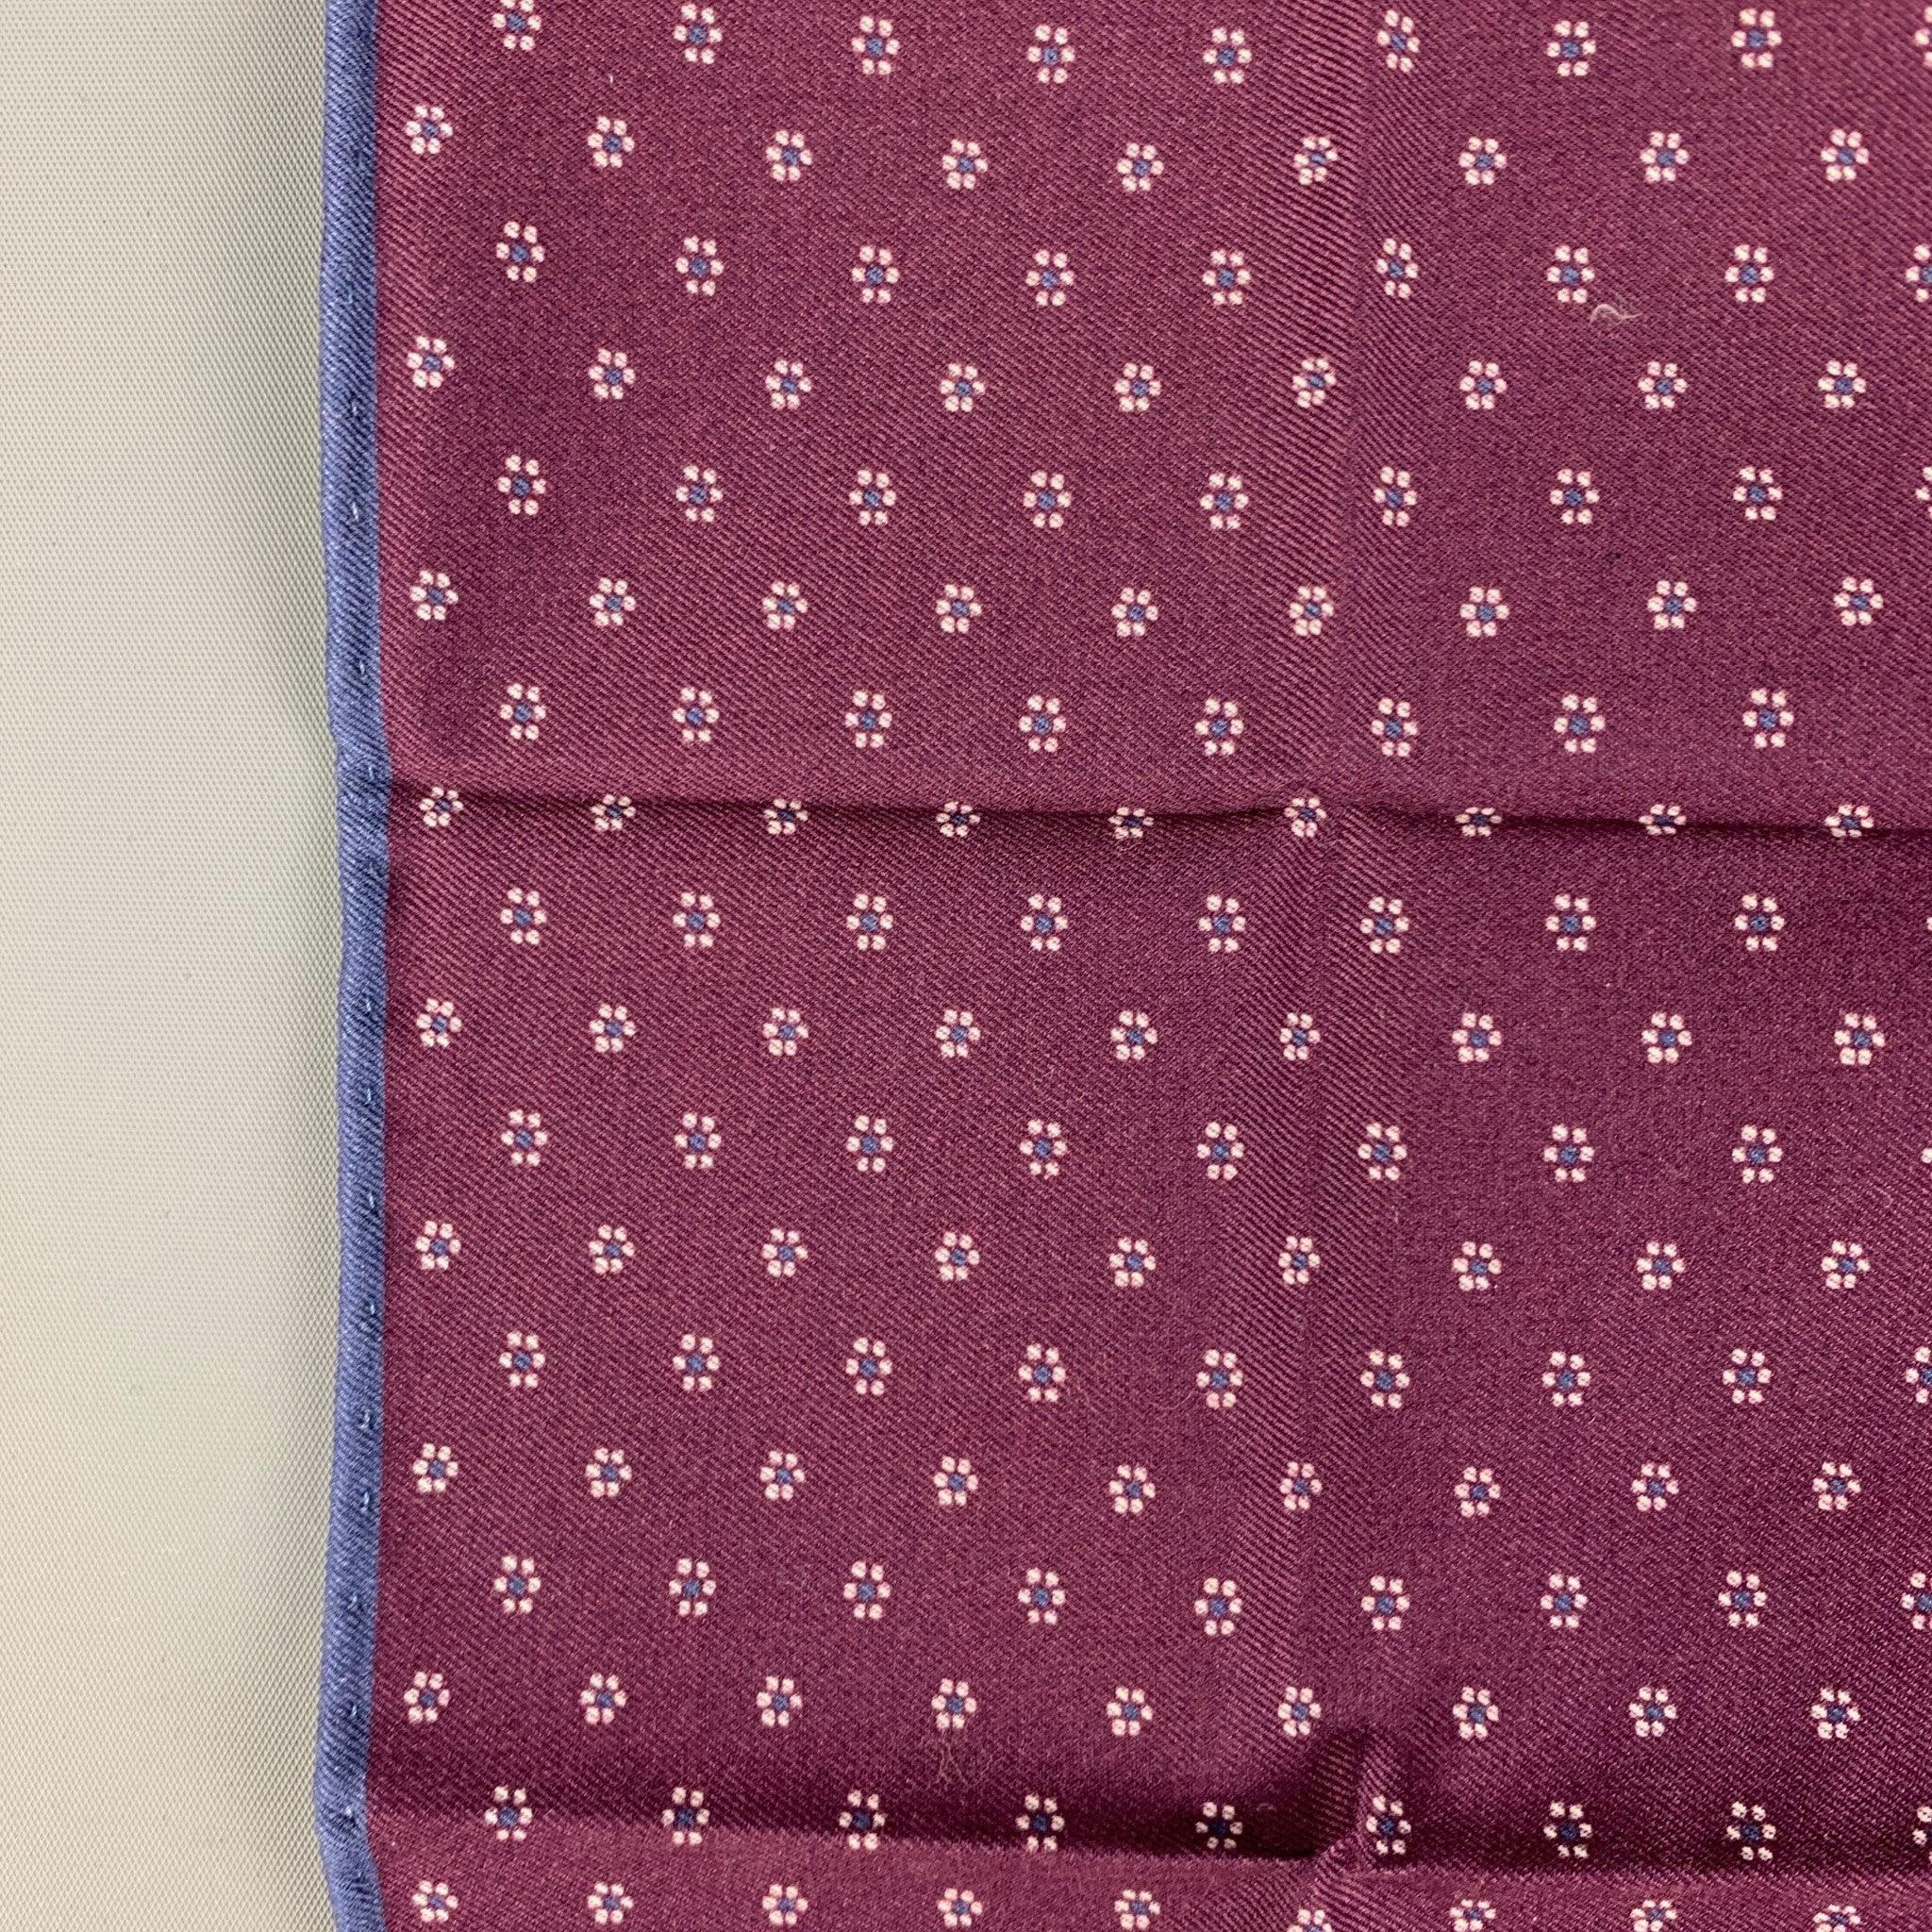 BRUNELLO CUCINELLI pocket square comes in a eggplant & navy floral cotton. Made in Italy.
New With Tags.
 

Measurements: 
   13.5 inches  x 13.5 inches 
  
  
 
Reference: 121991
Category: Pocket Square
More Details
    
Brand:  BRUNELLO